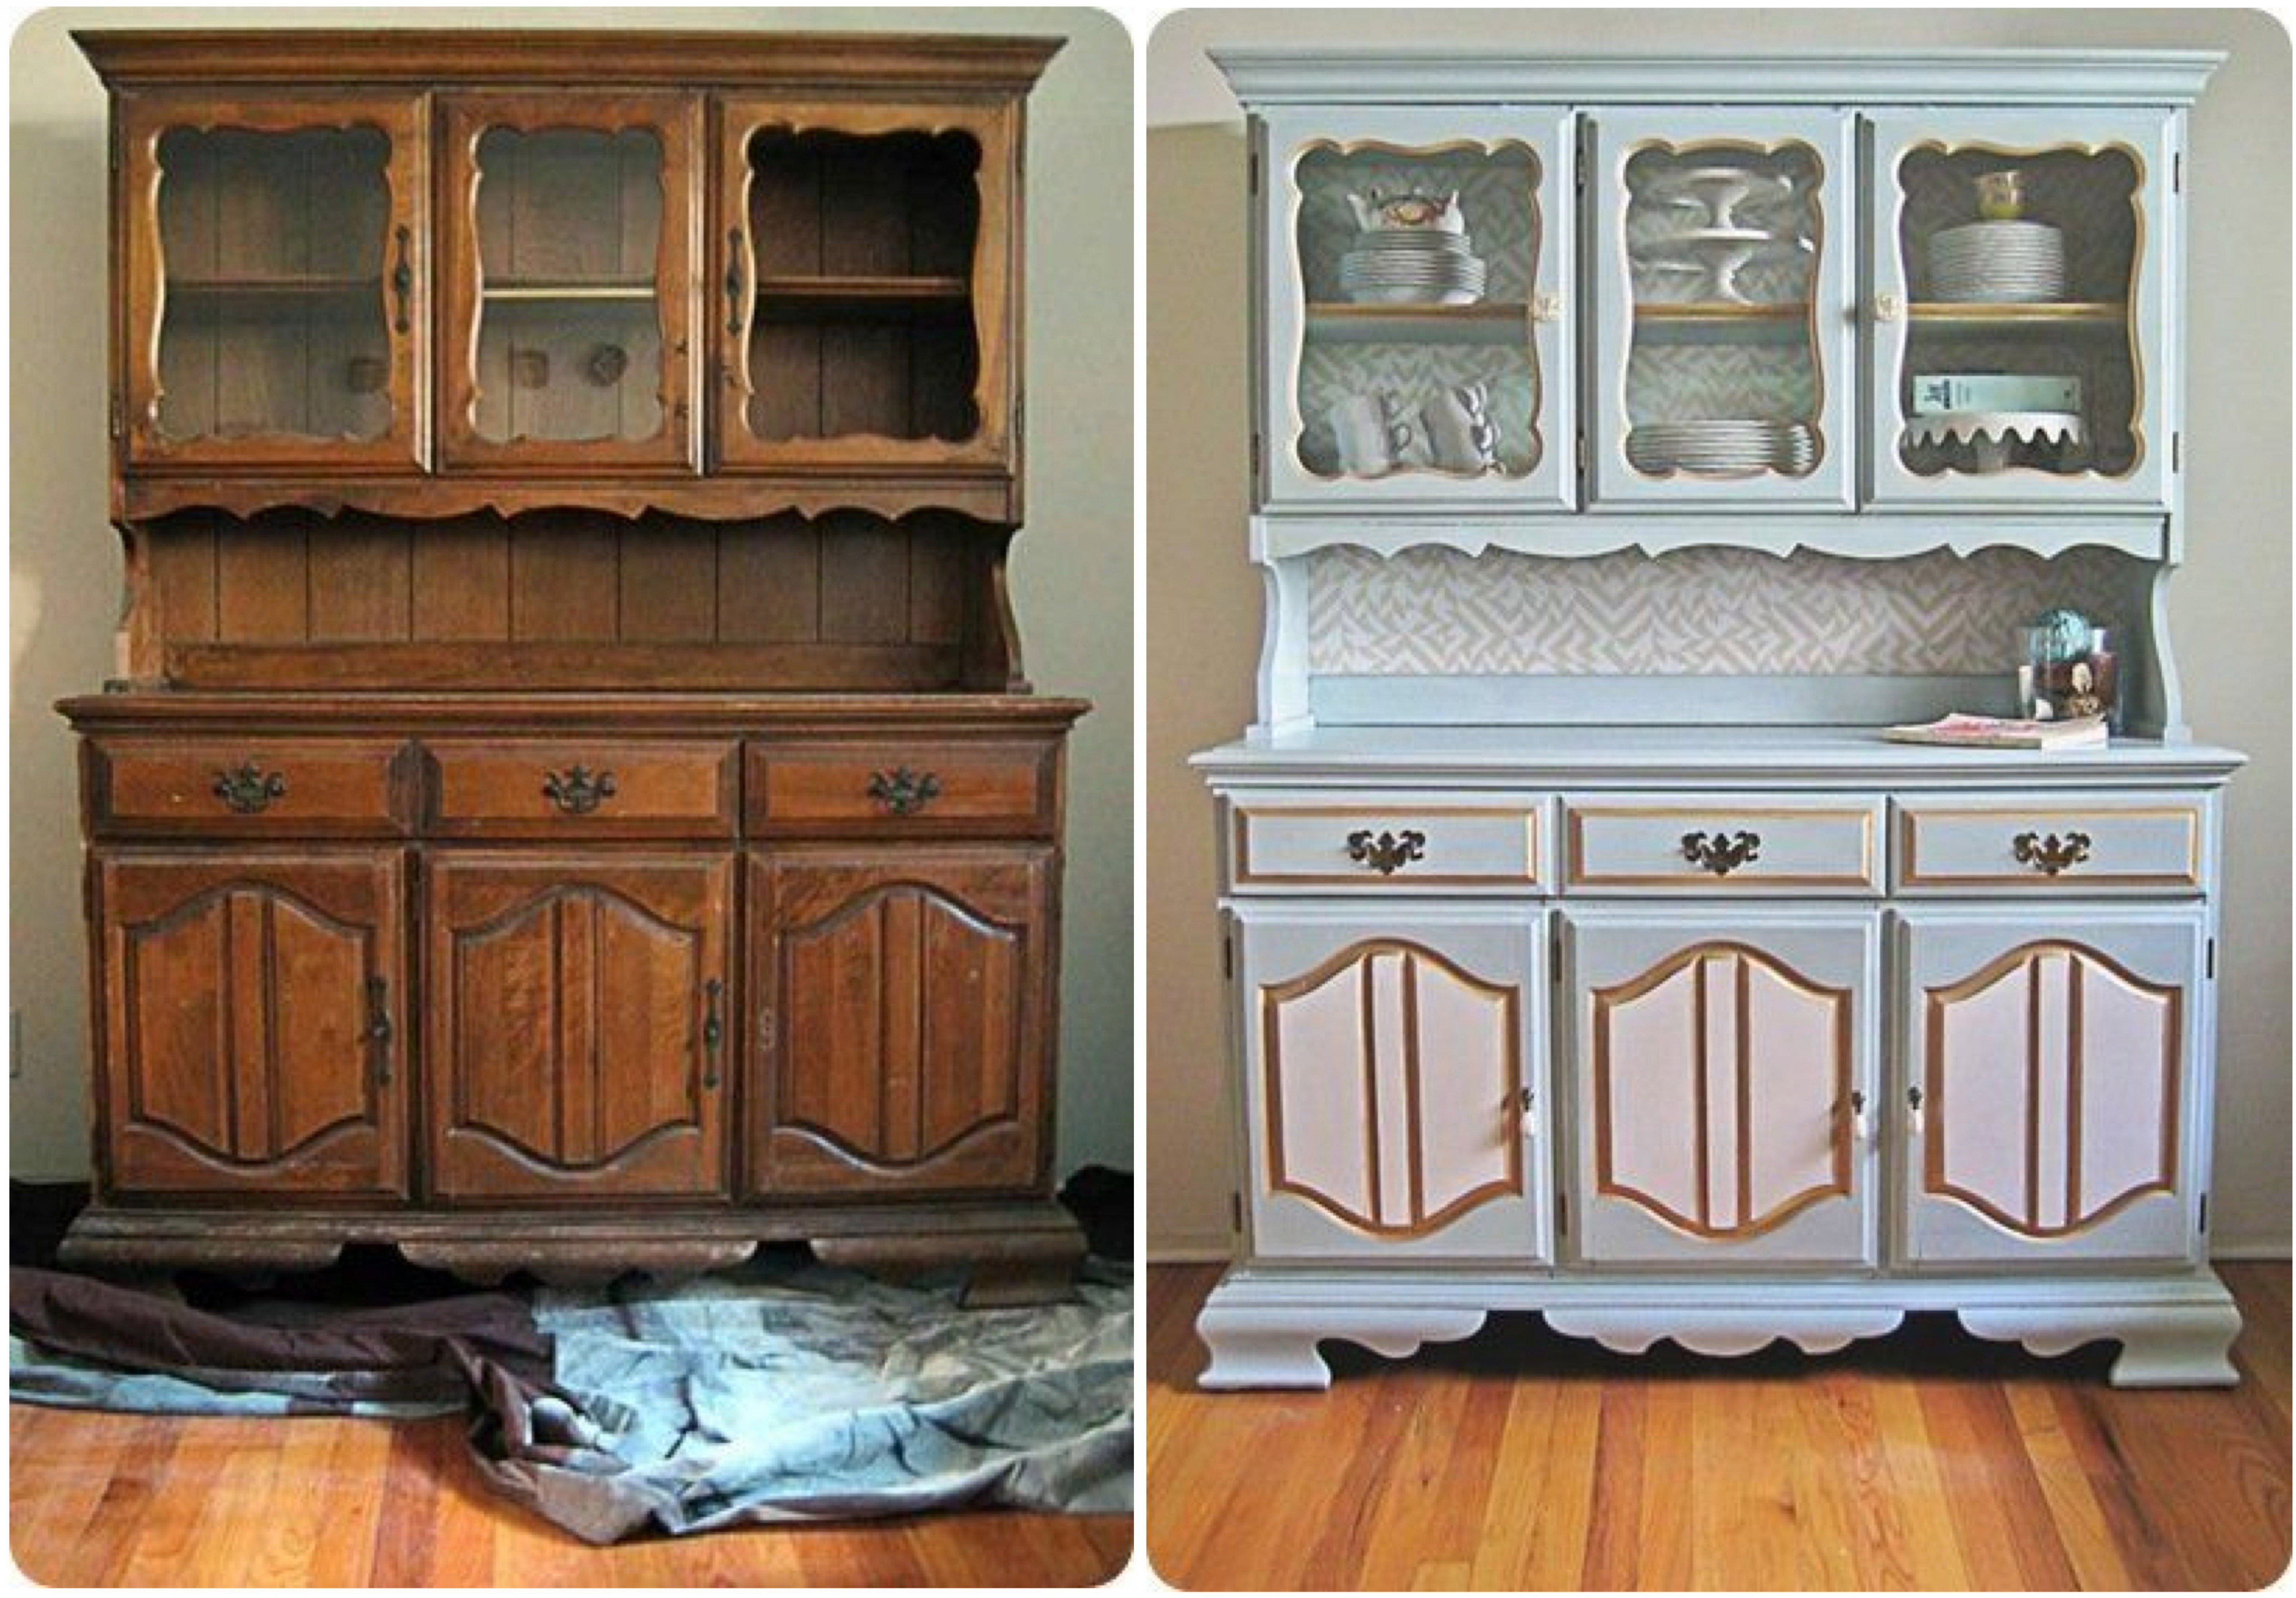 China Hutch Before And After Using Annie Sloan Chalk Paint ..